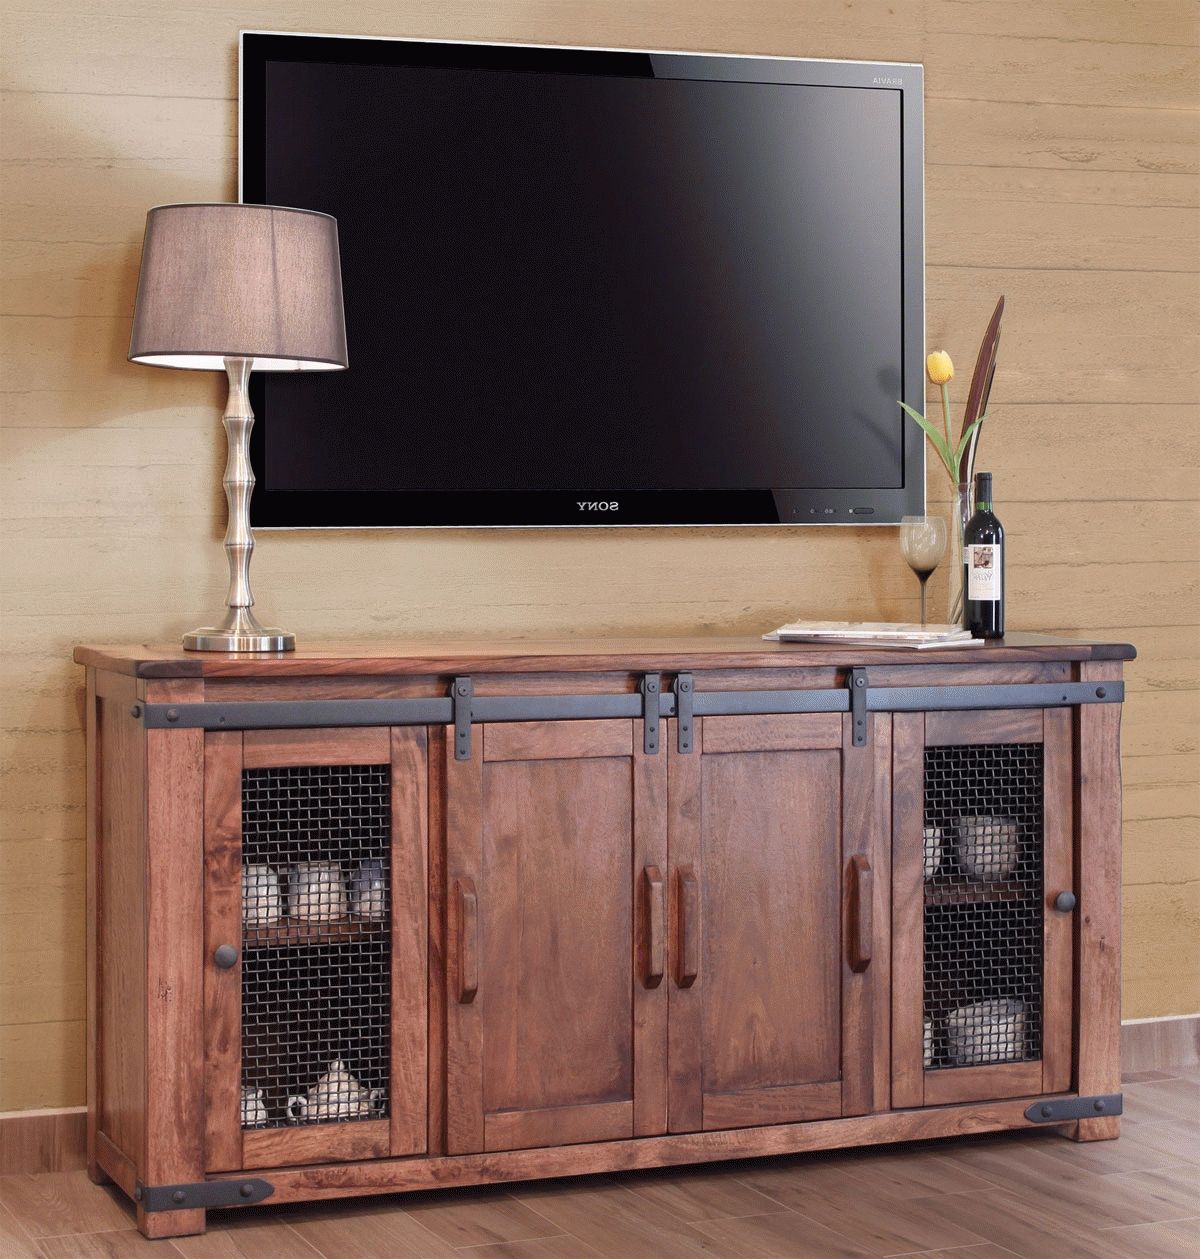 Barn Door Tv Stand, Rustic Barn Door Tv Stand, Rustic Tv Stand Intended For Rustic Tv Cabinets (View 3 of 20)